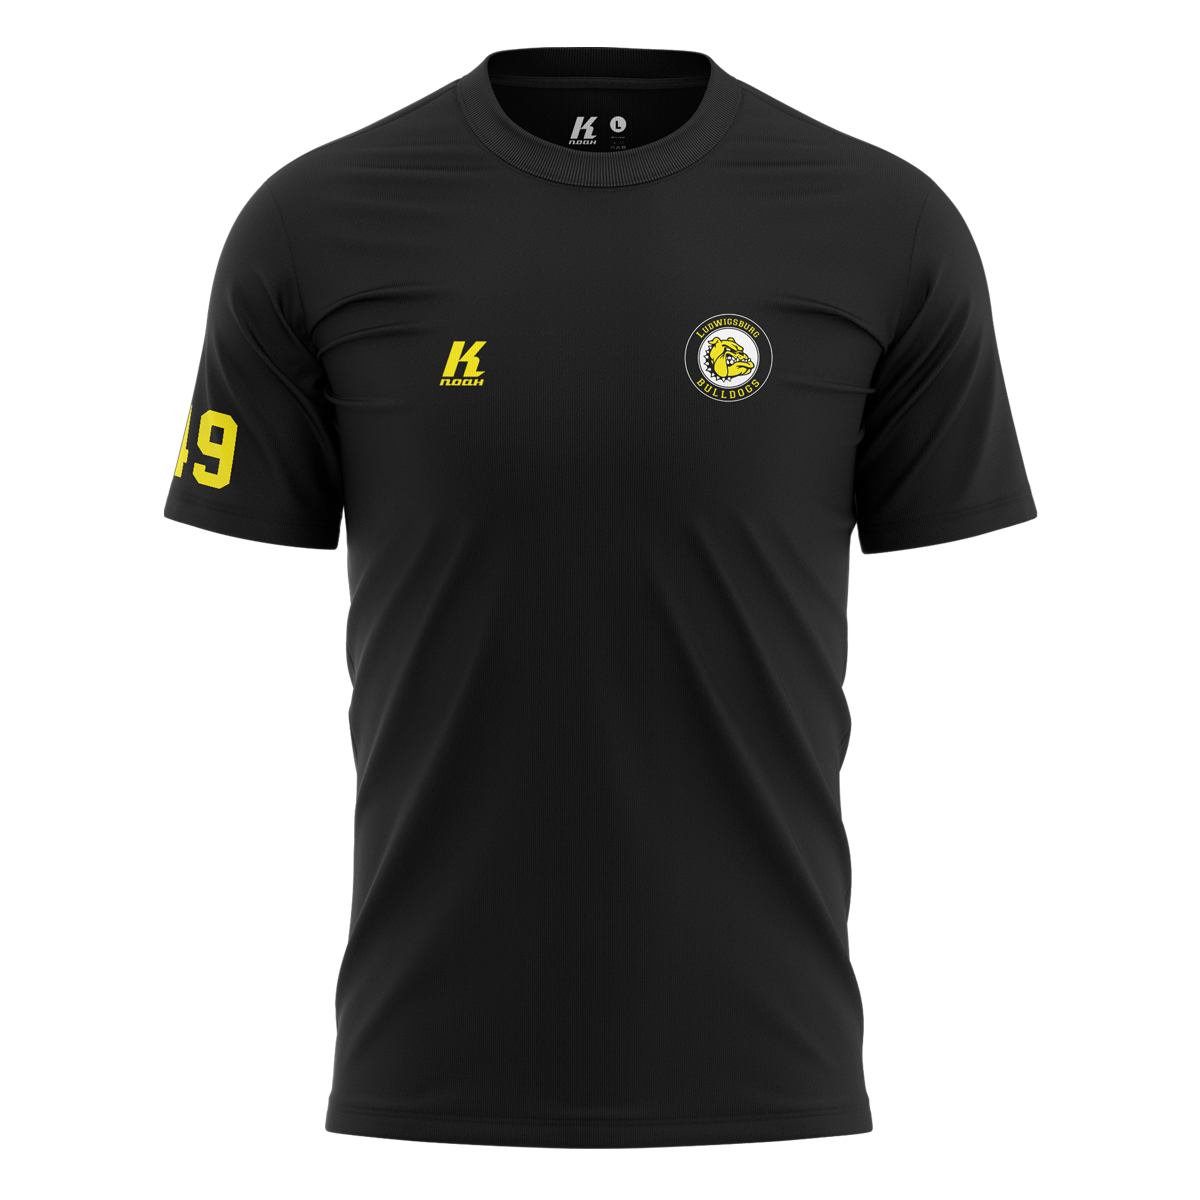 LB-Bulldogs Primary Tee black 190g. with Playernumber/Initials